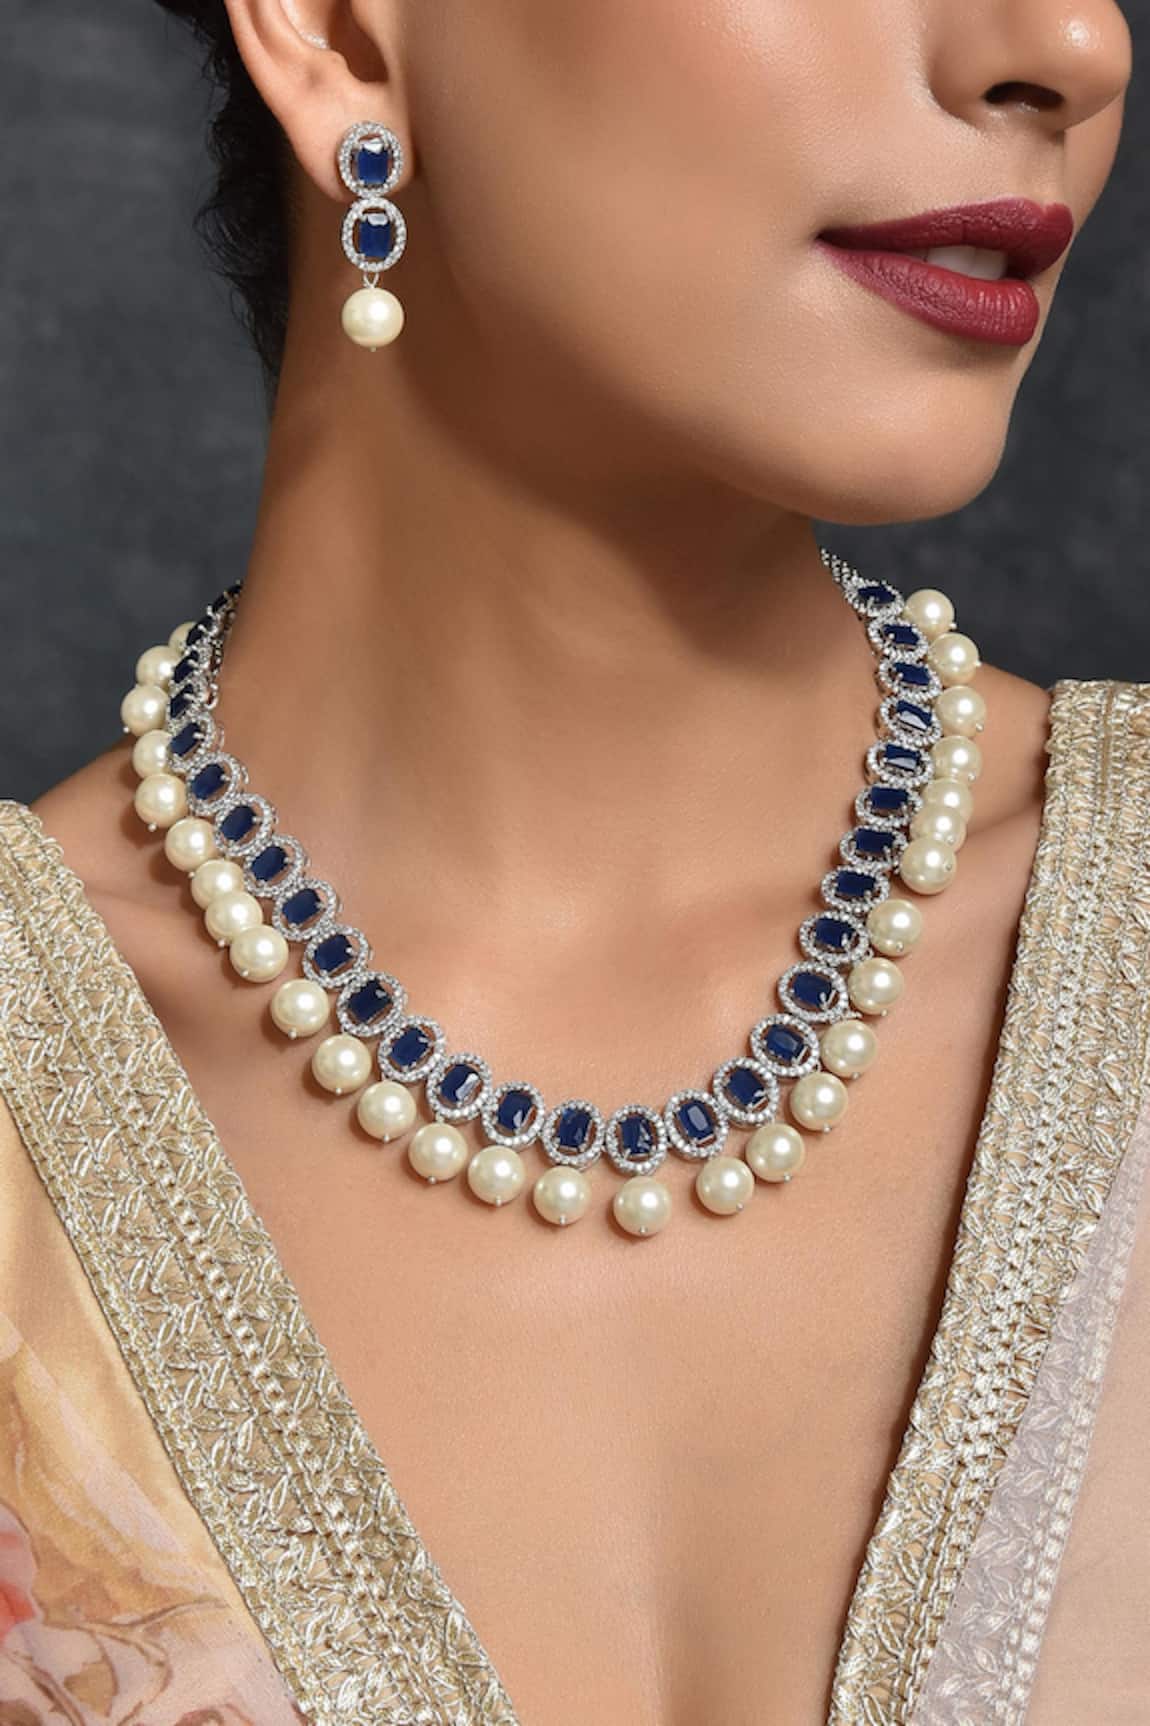 Buy Bridal Sapphire Necklace Earrings Set Statement Jewelry Set Online in  India  Etsy